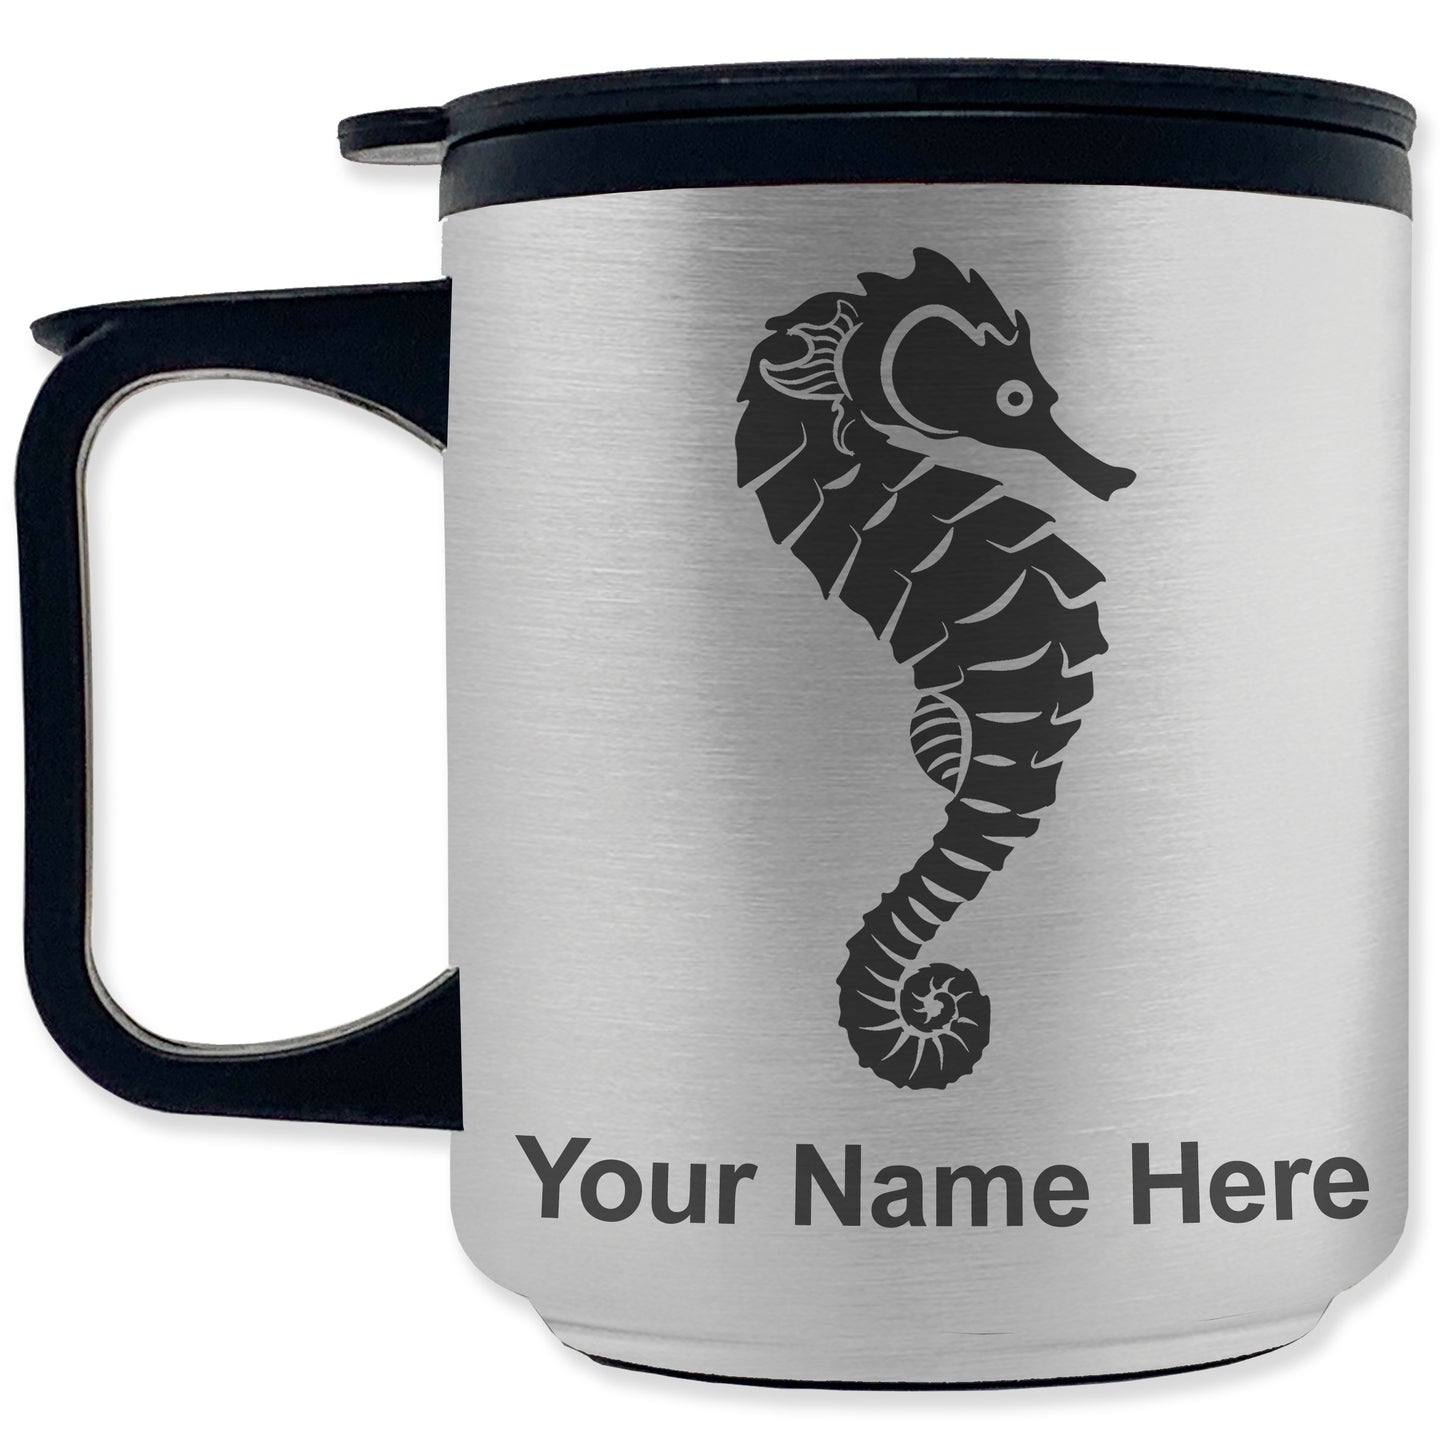 Coffee Travel Mug, Seahorse, Personalized Engraving Included